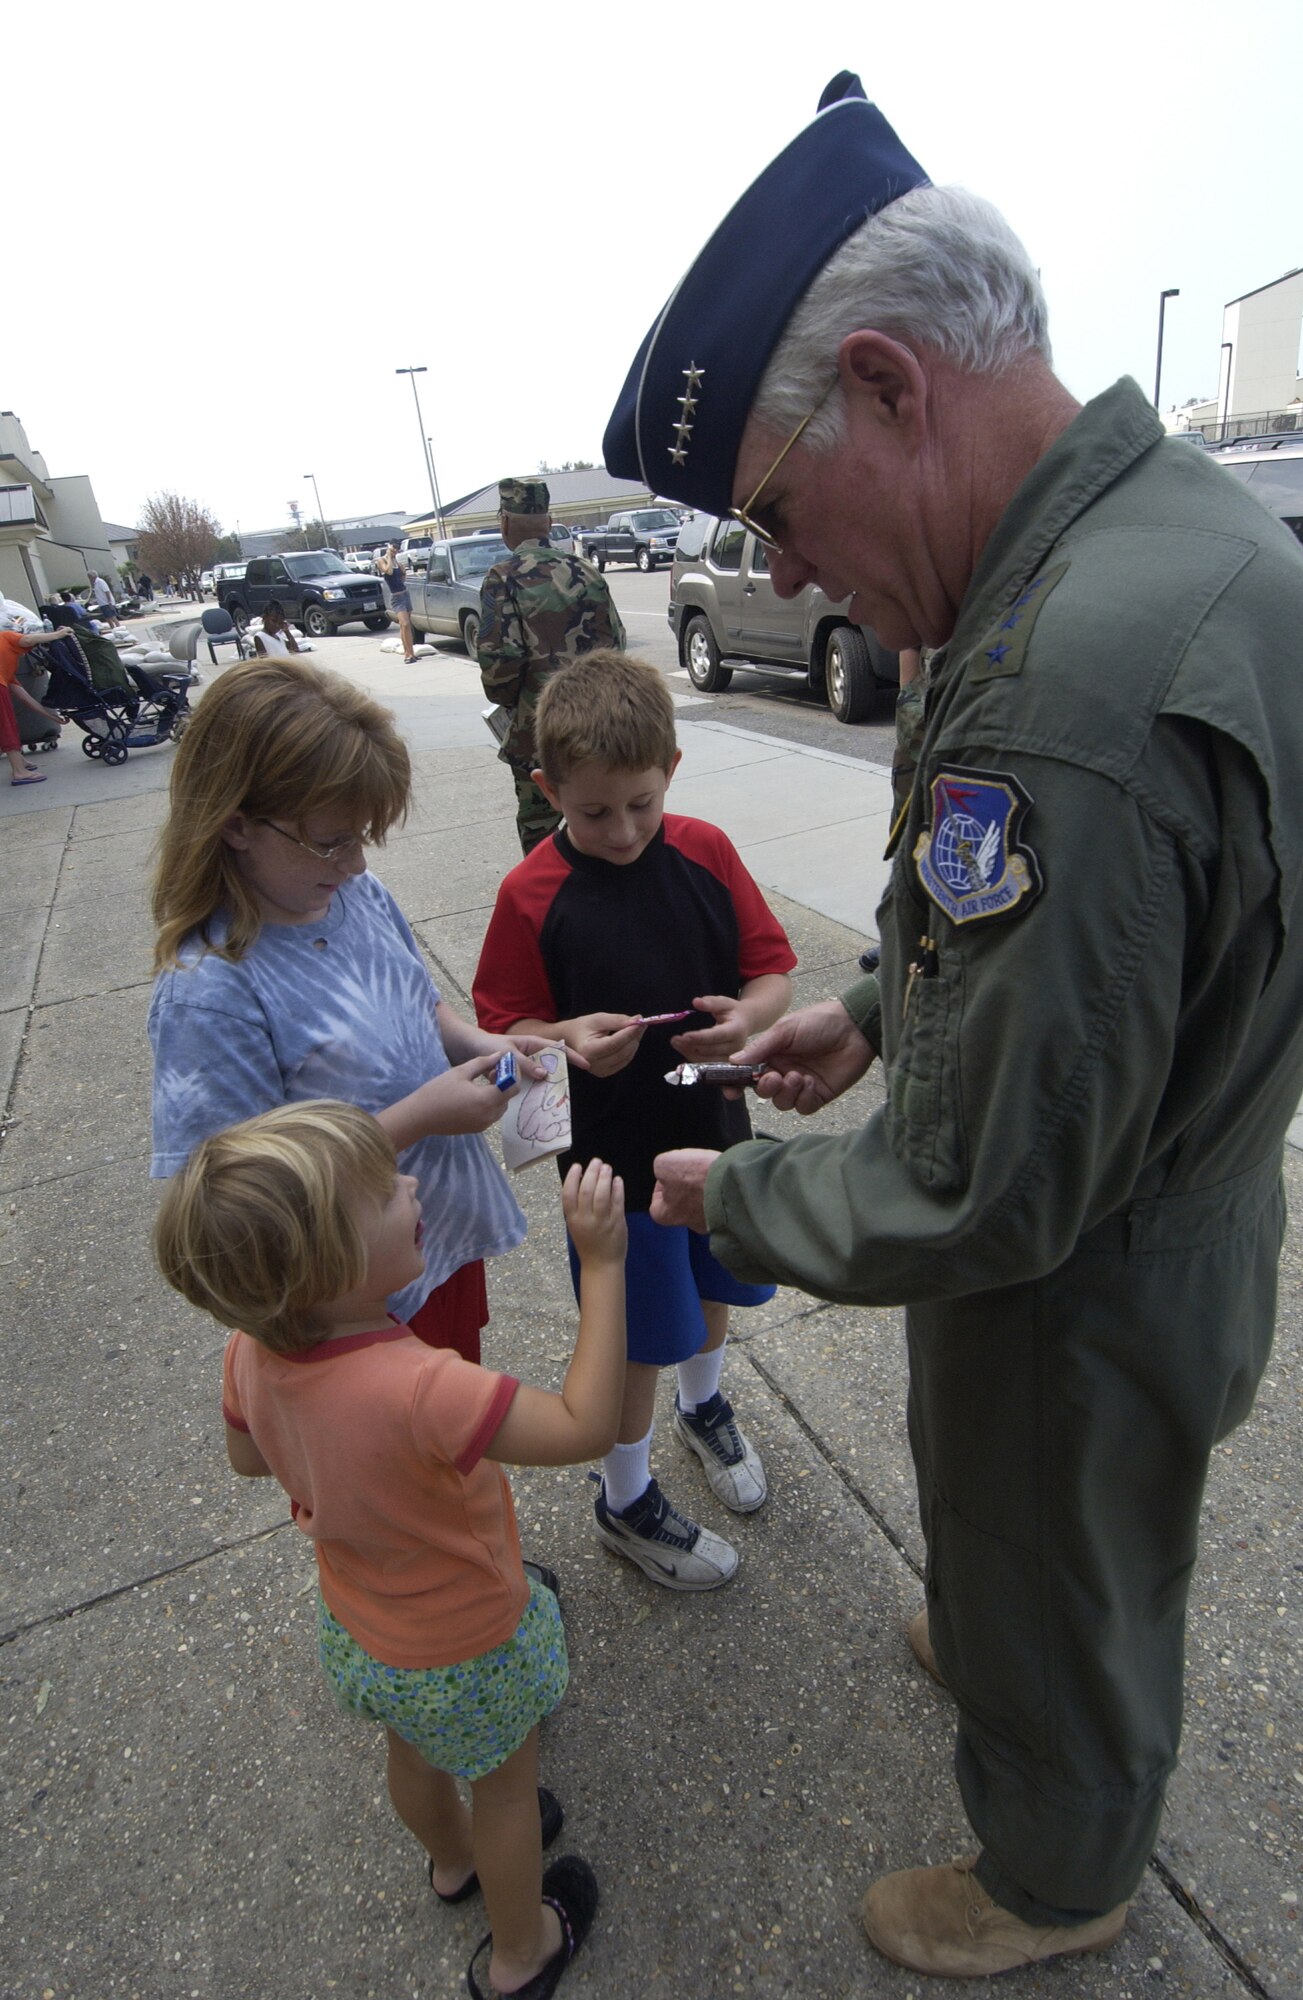 Gen. William R. Looney III, Air Education and Training Command commander, gets a smile from some children at Keesler Air Force Base as he passes out candy during a trip to the base Thursday. General Looney surveyed the damaged caused by Hurricane Katrina and learned first-hand how the command can support. (Photo by TSgt Jennifer C. Wallis, 1st Combat Camera Squadron)